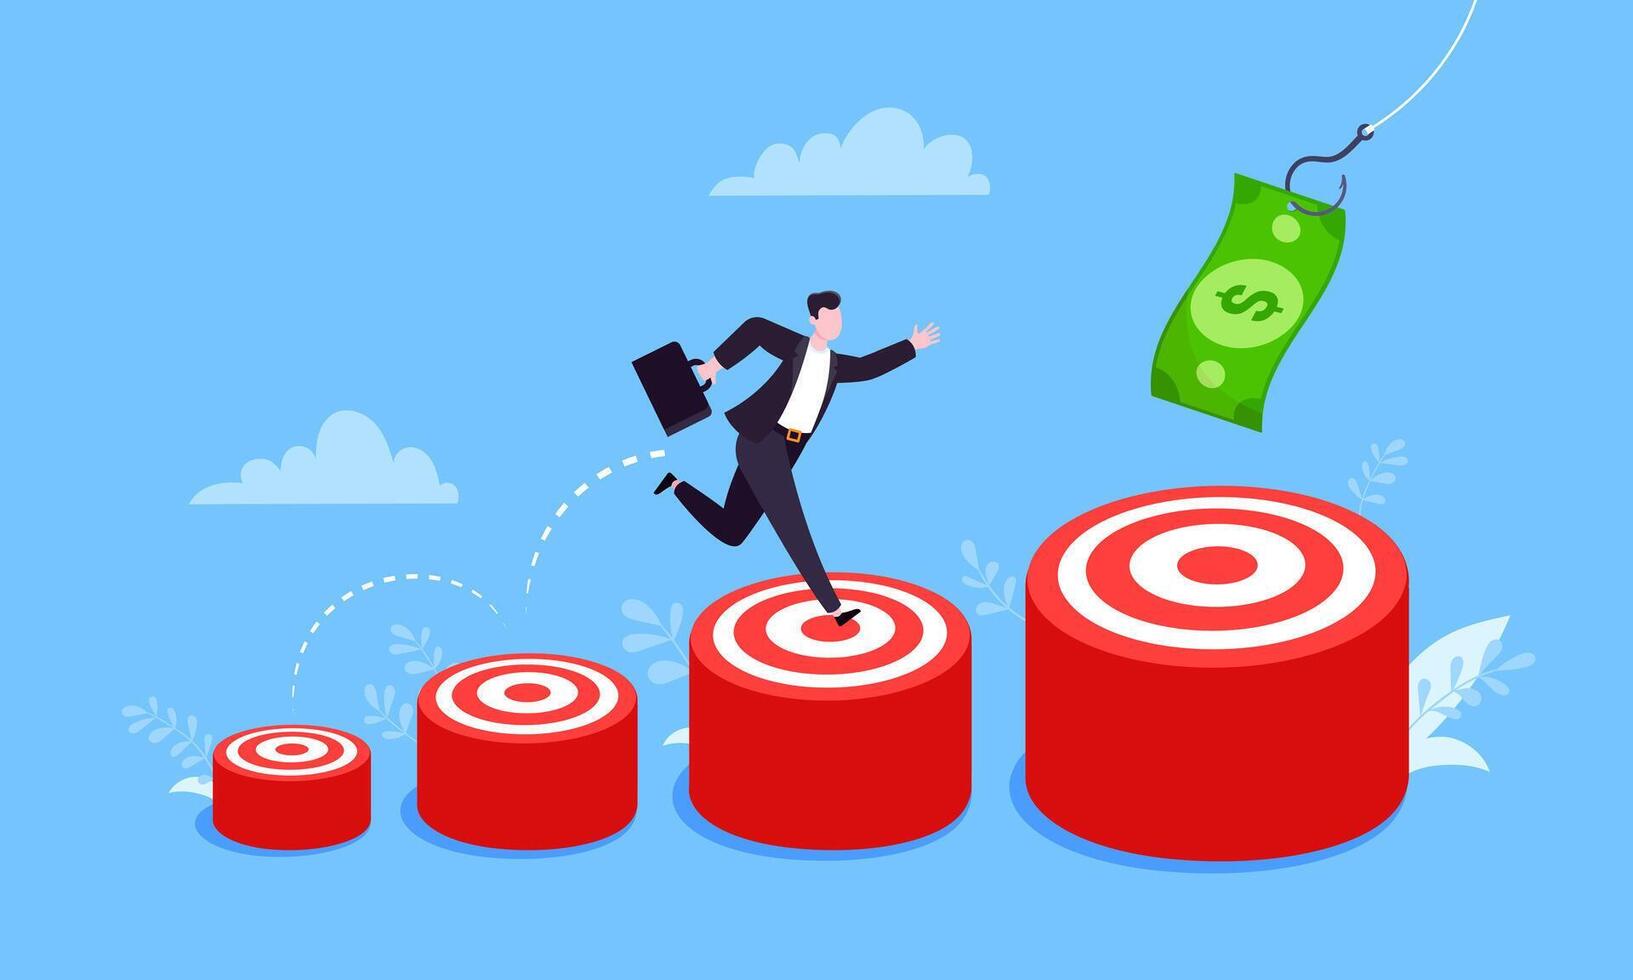 Businessman runs and jumps from small target goal to reach bigger target goal achievement flat style design vector illustration.